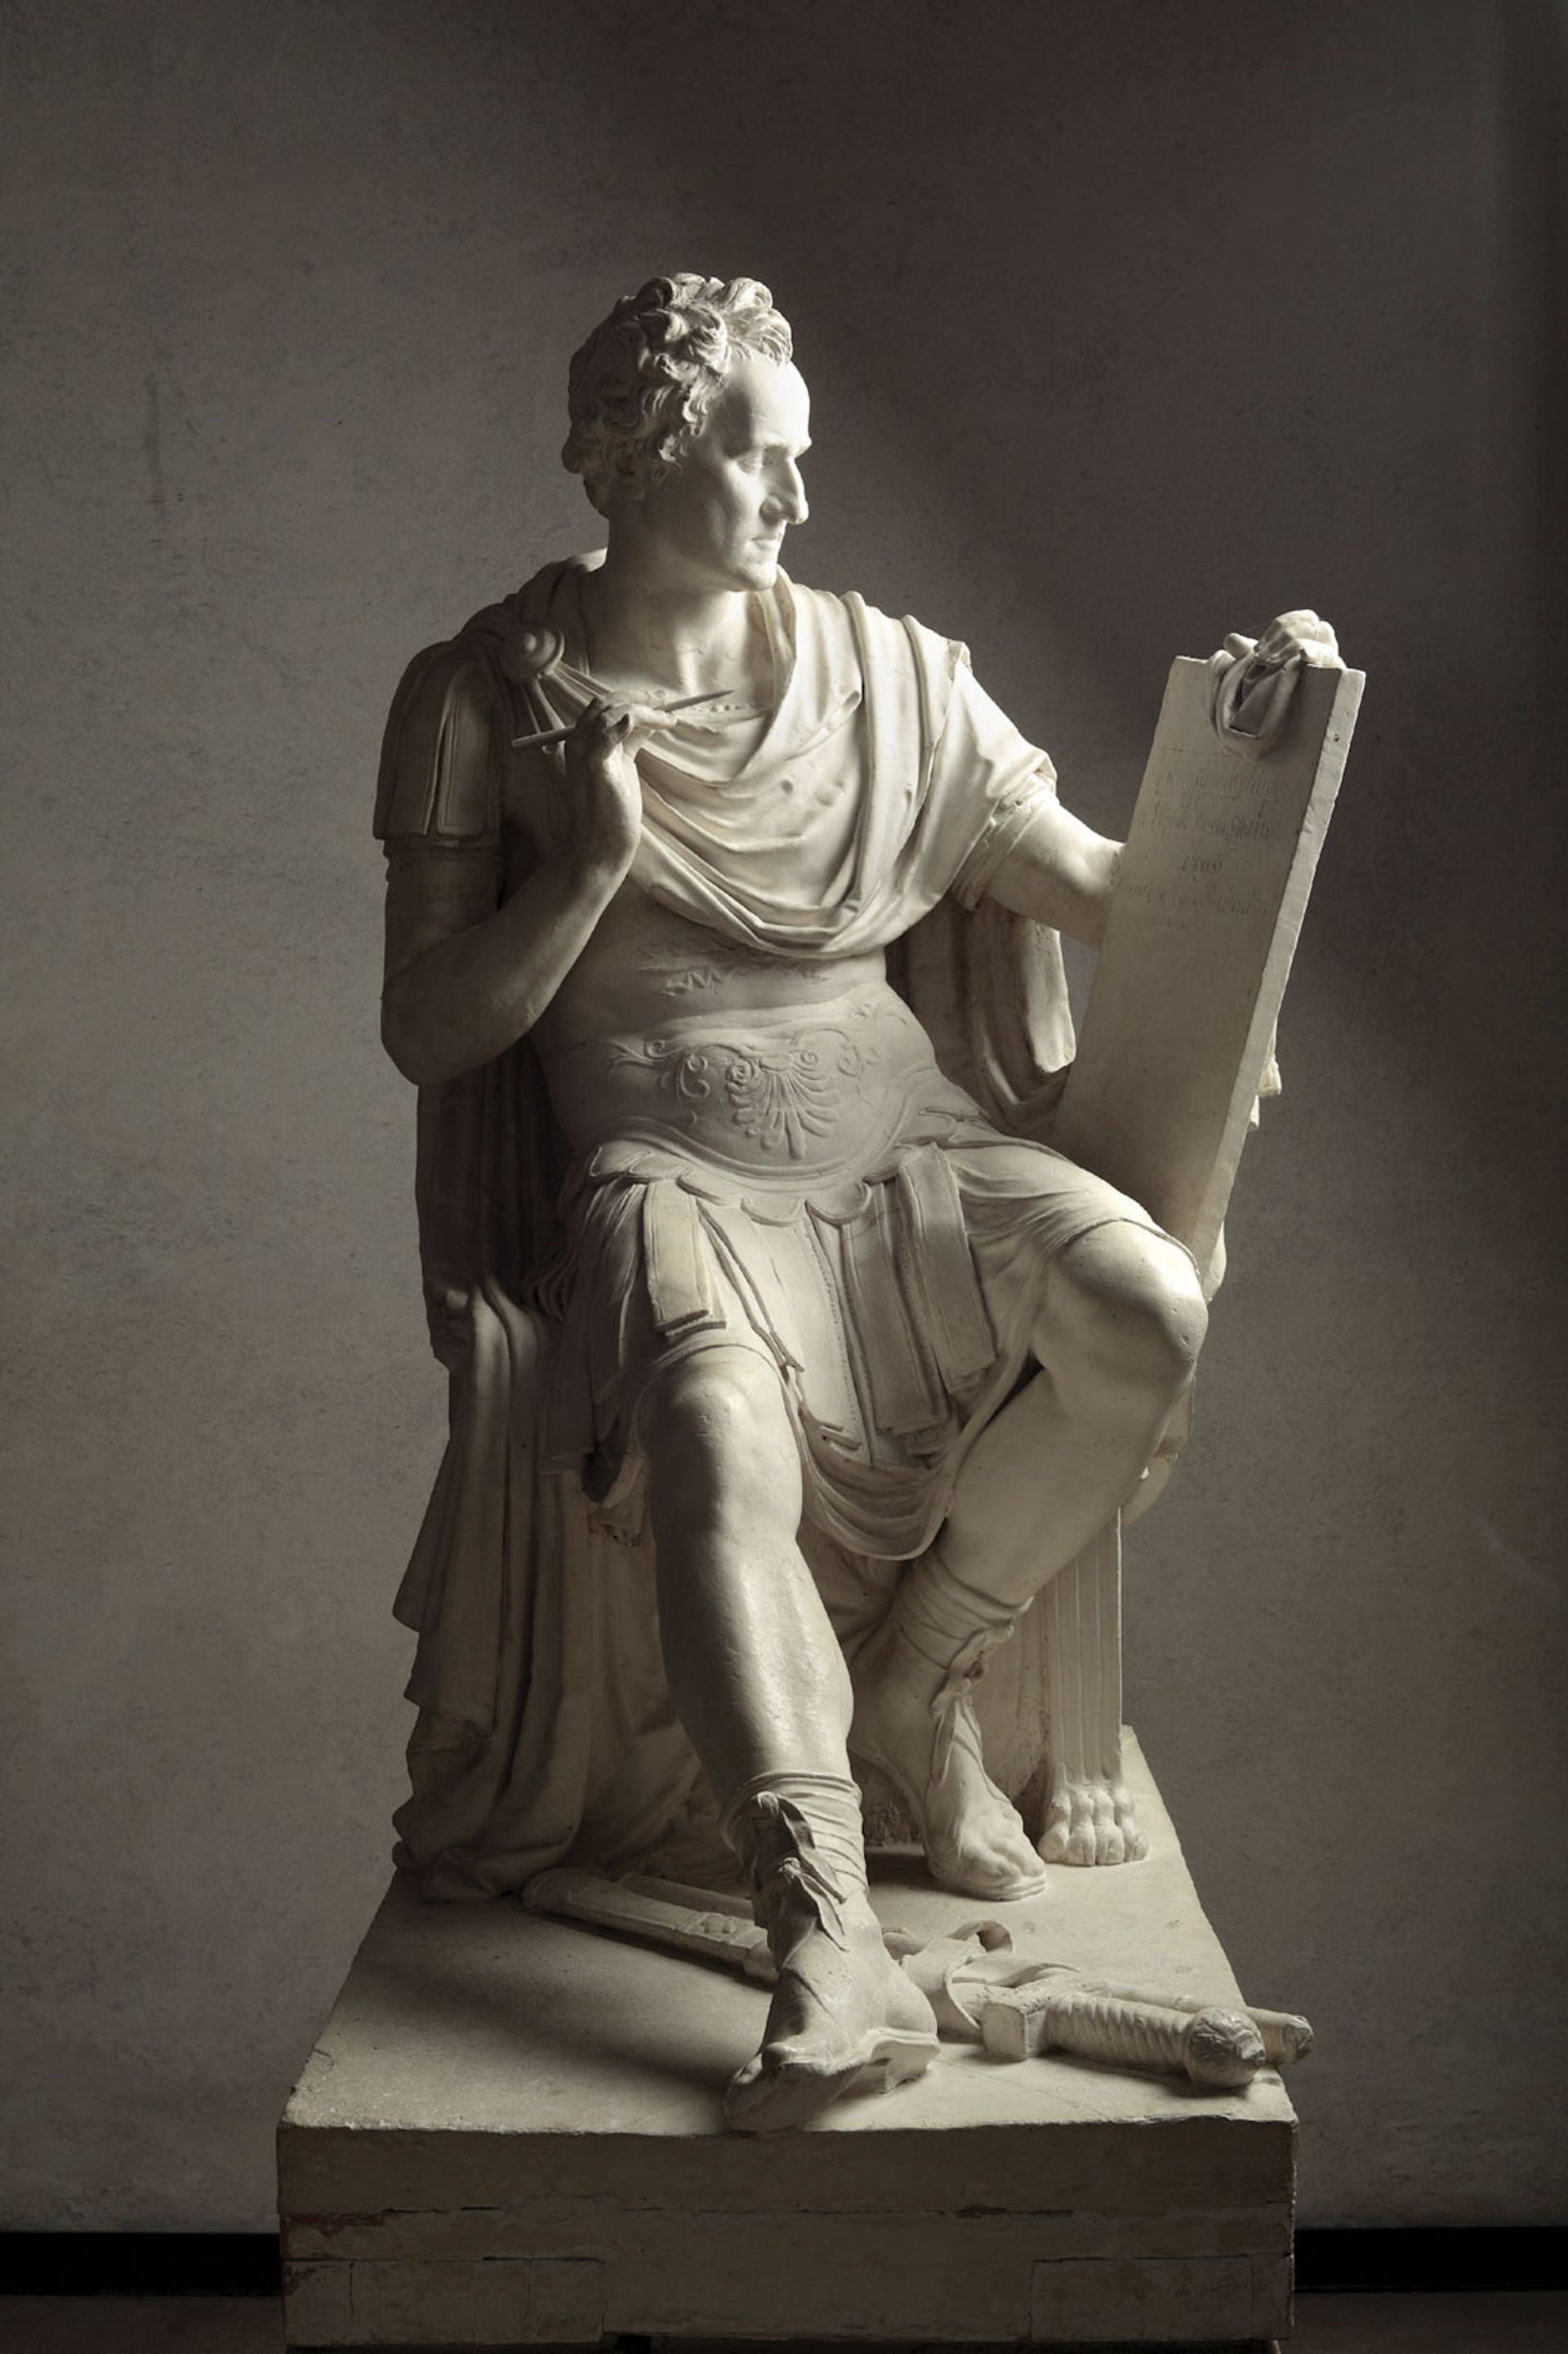 Thomas Jefferson, who believed no US sculptor was up to the task, recommended Antonio Canova to capture Washington’s likeness Fabio Zonta